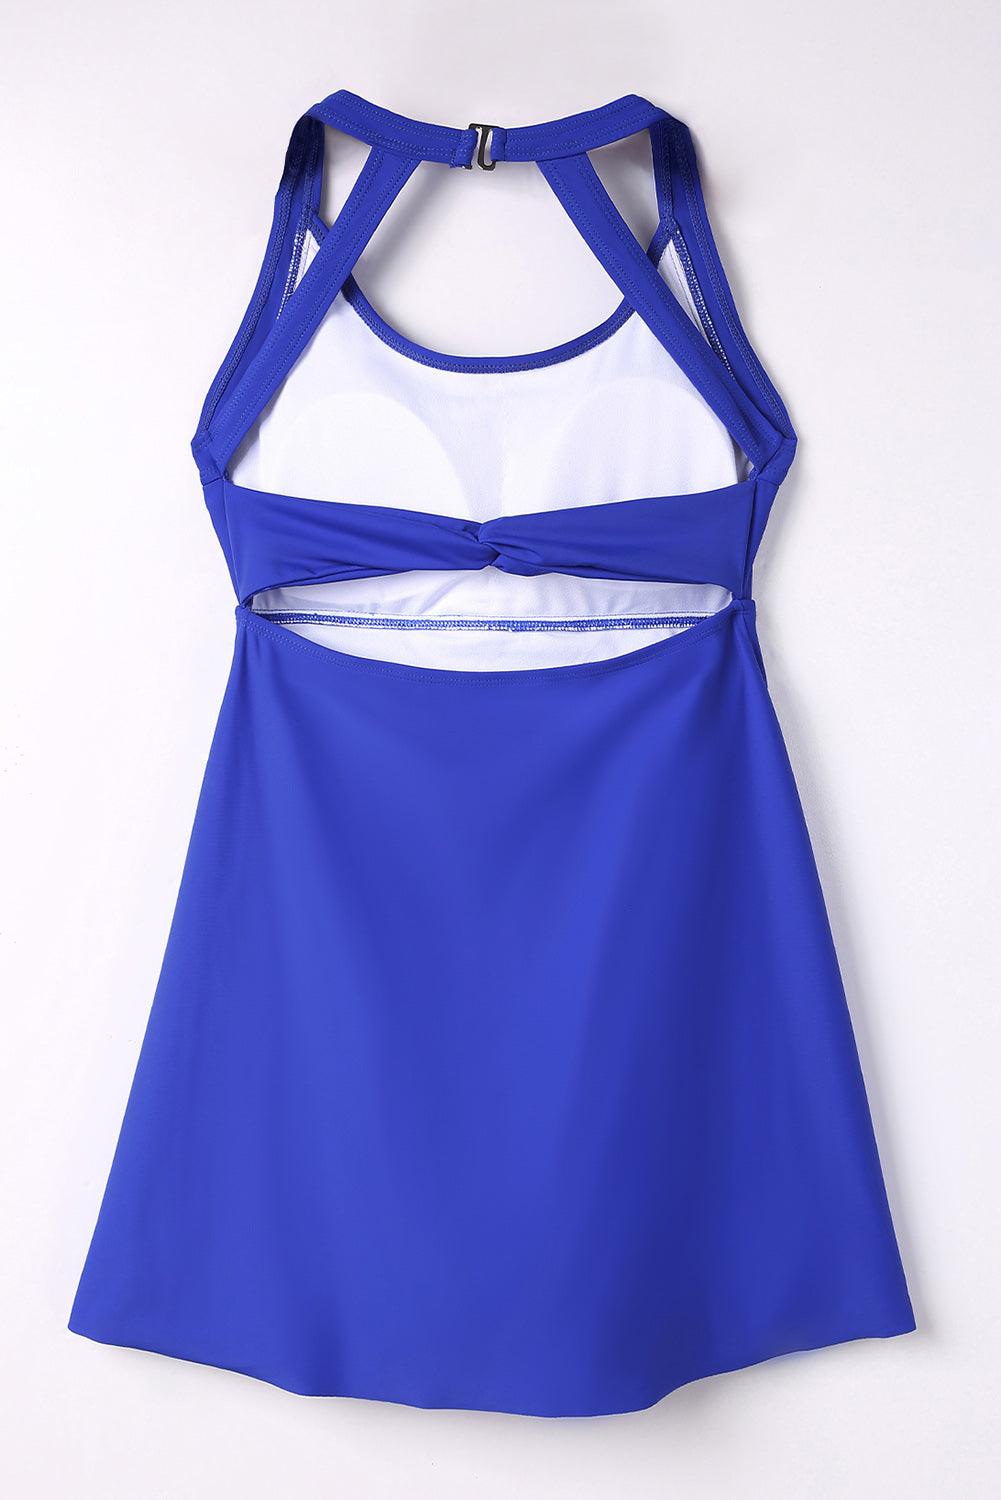 Strappy Halterneck Skirt Style One Piece Swimsuit - L & M Kee, LLC